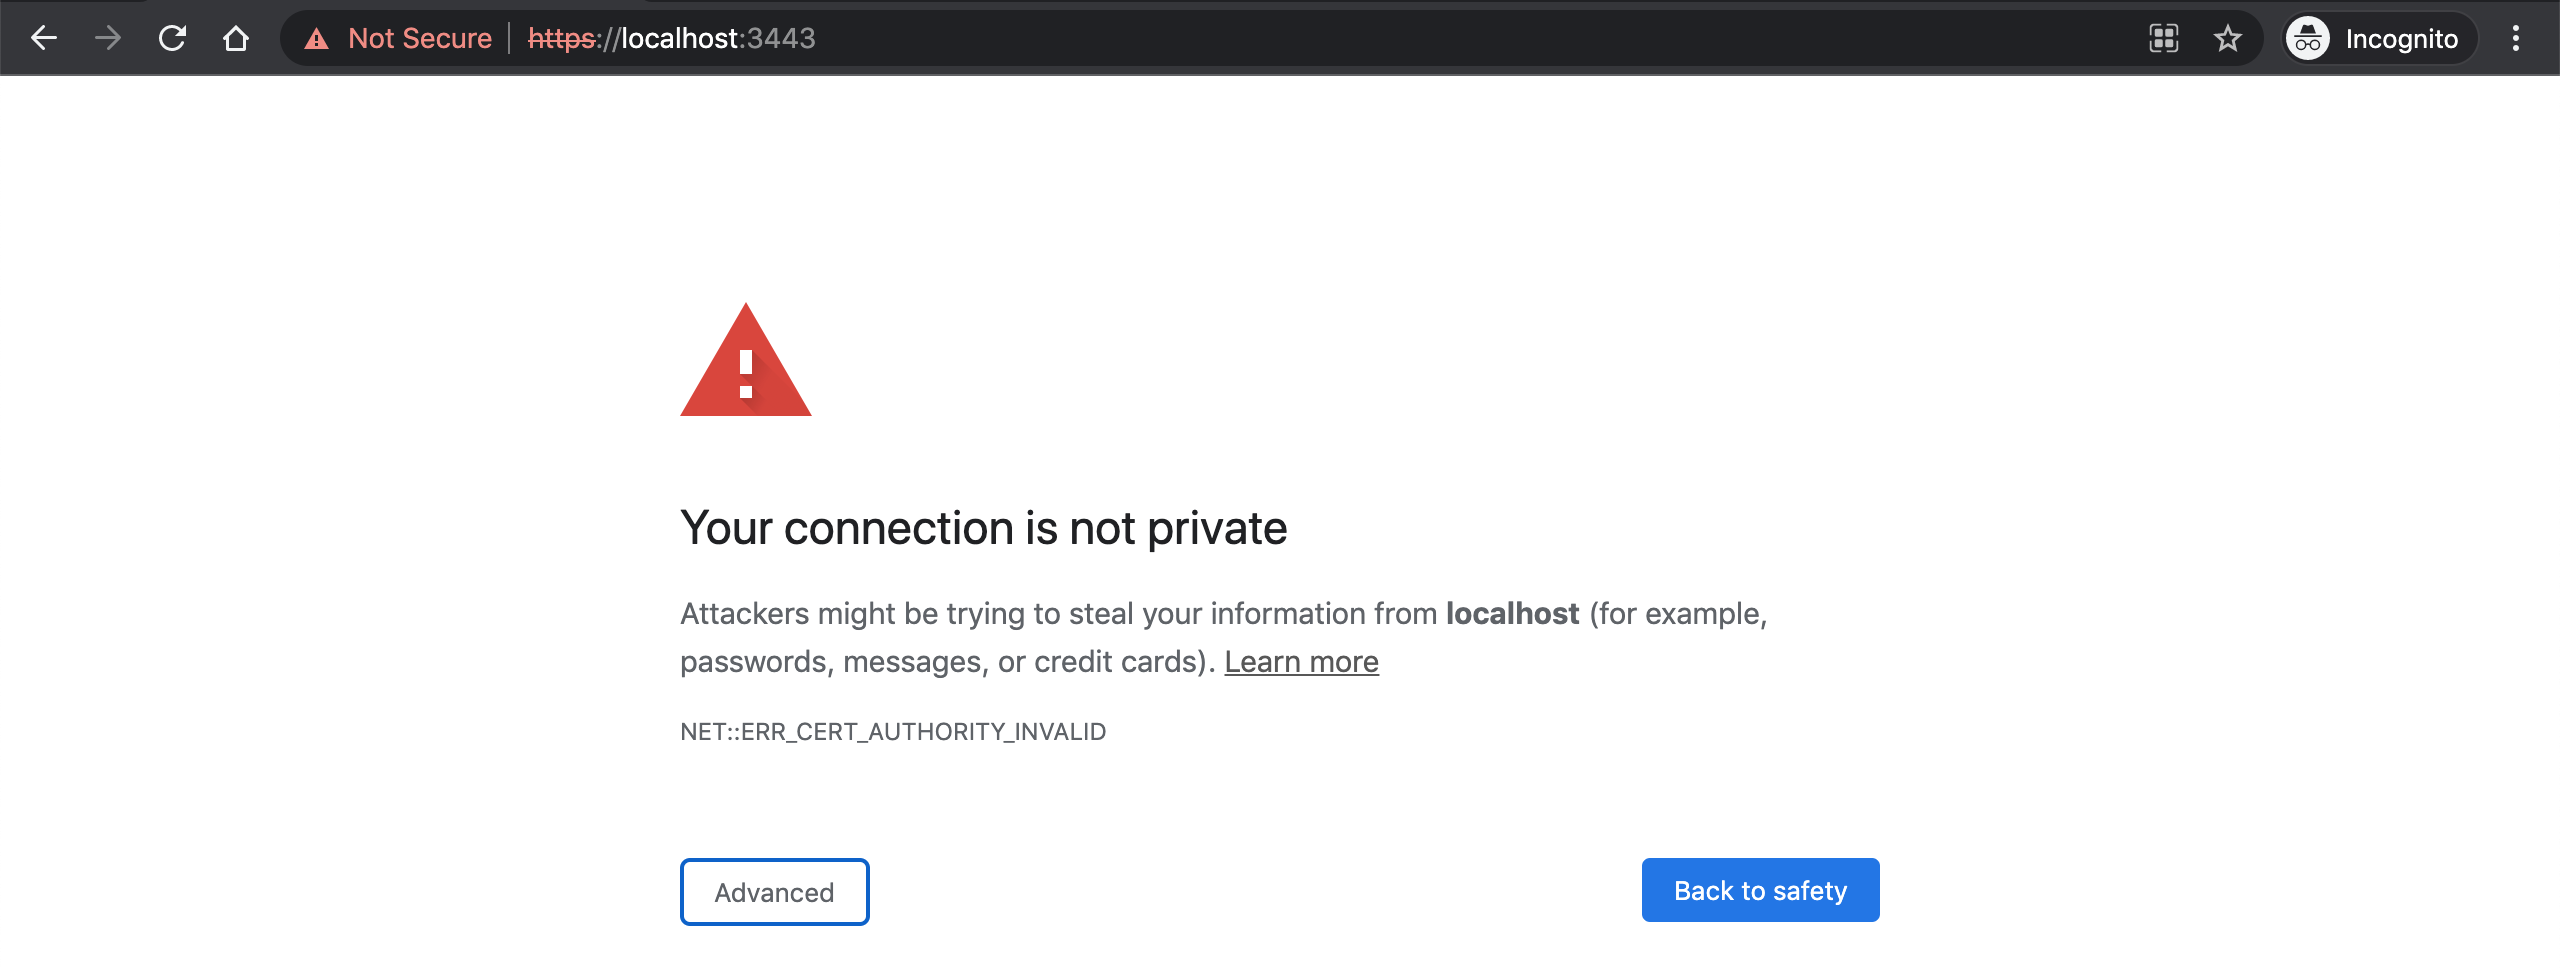 your-connection-is-not-private-3443